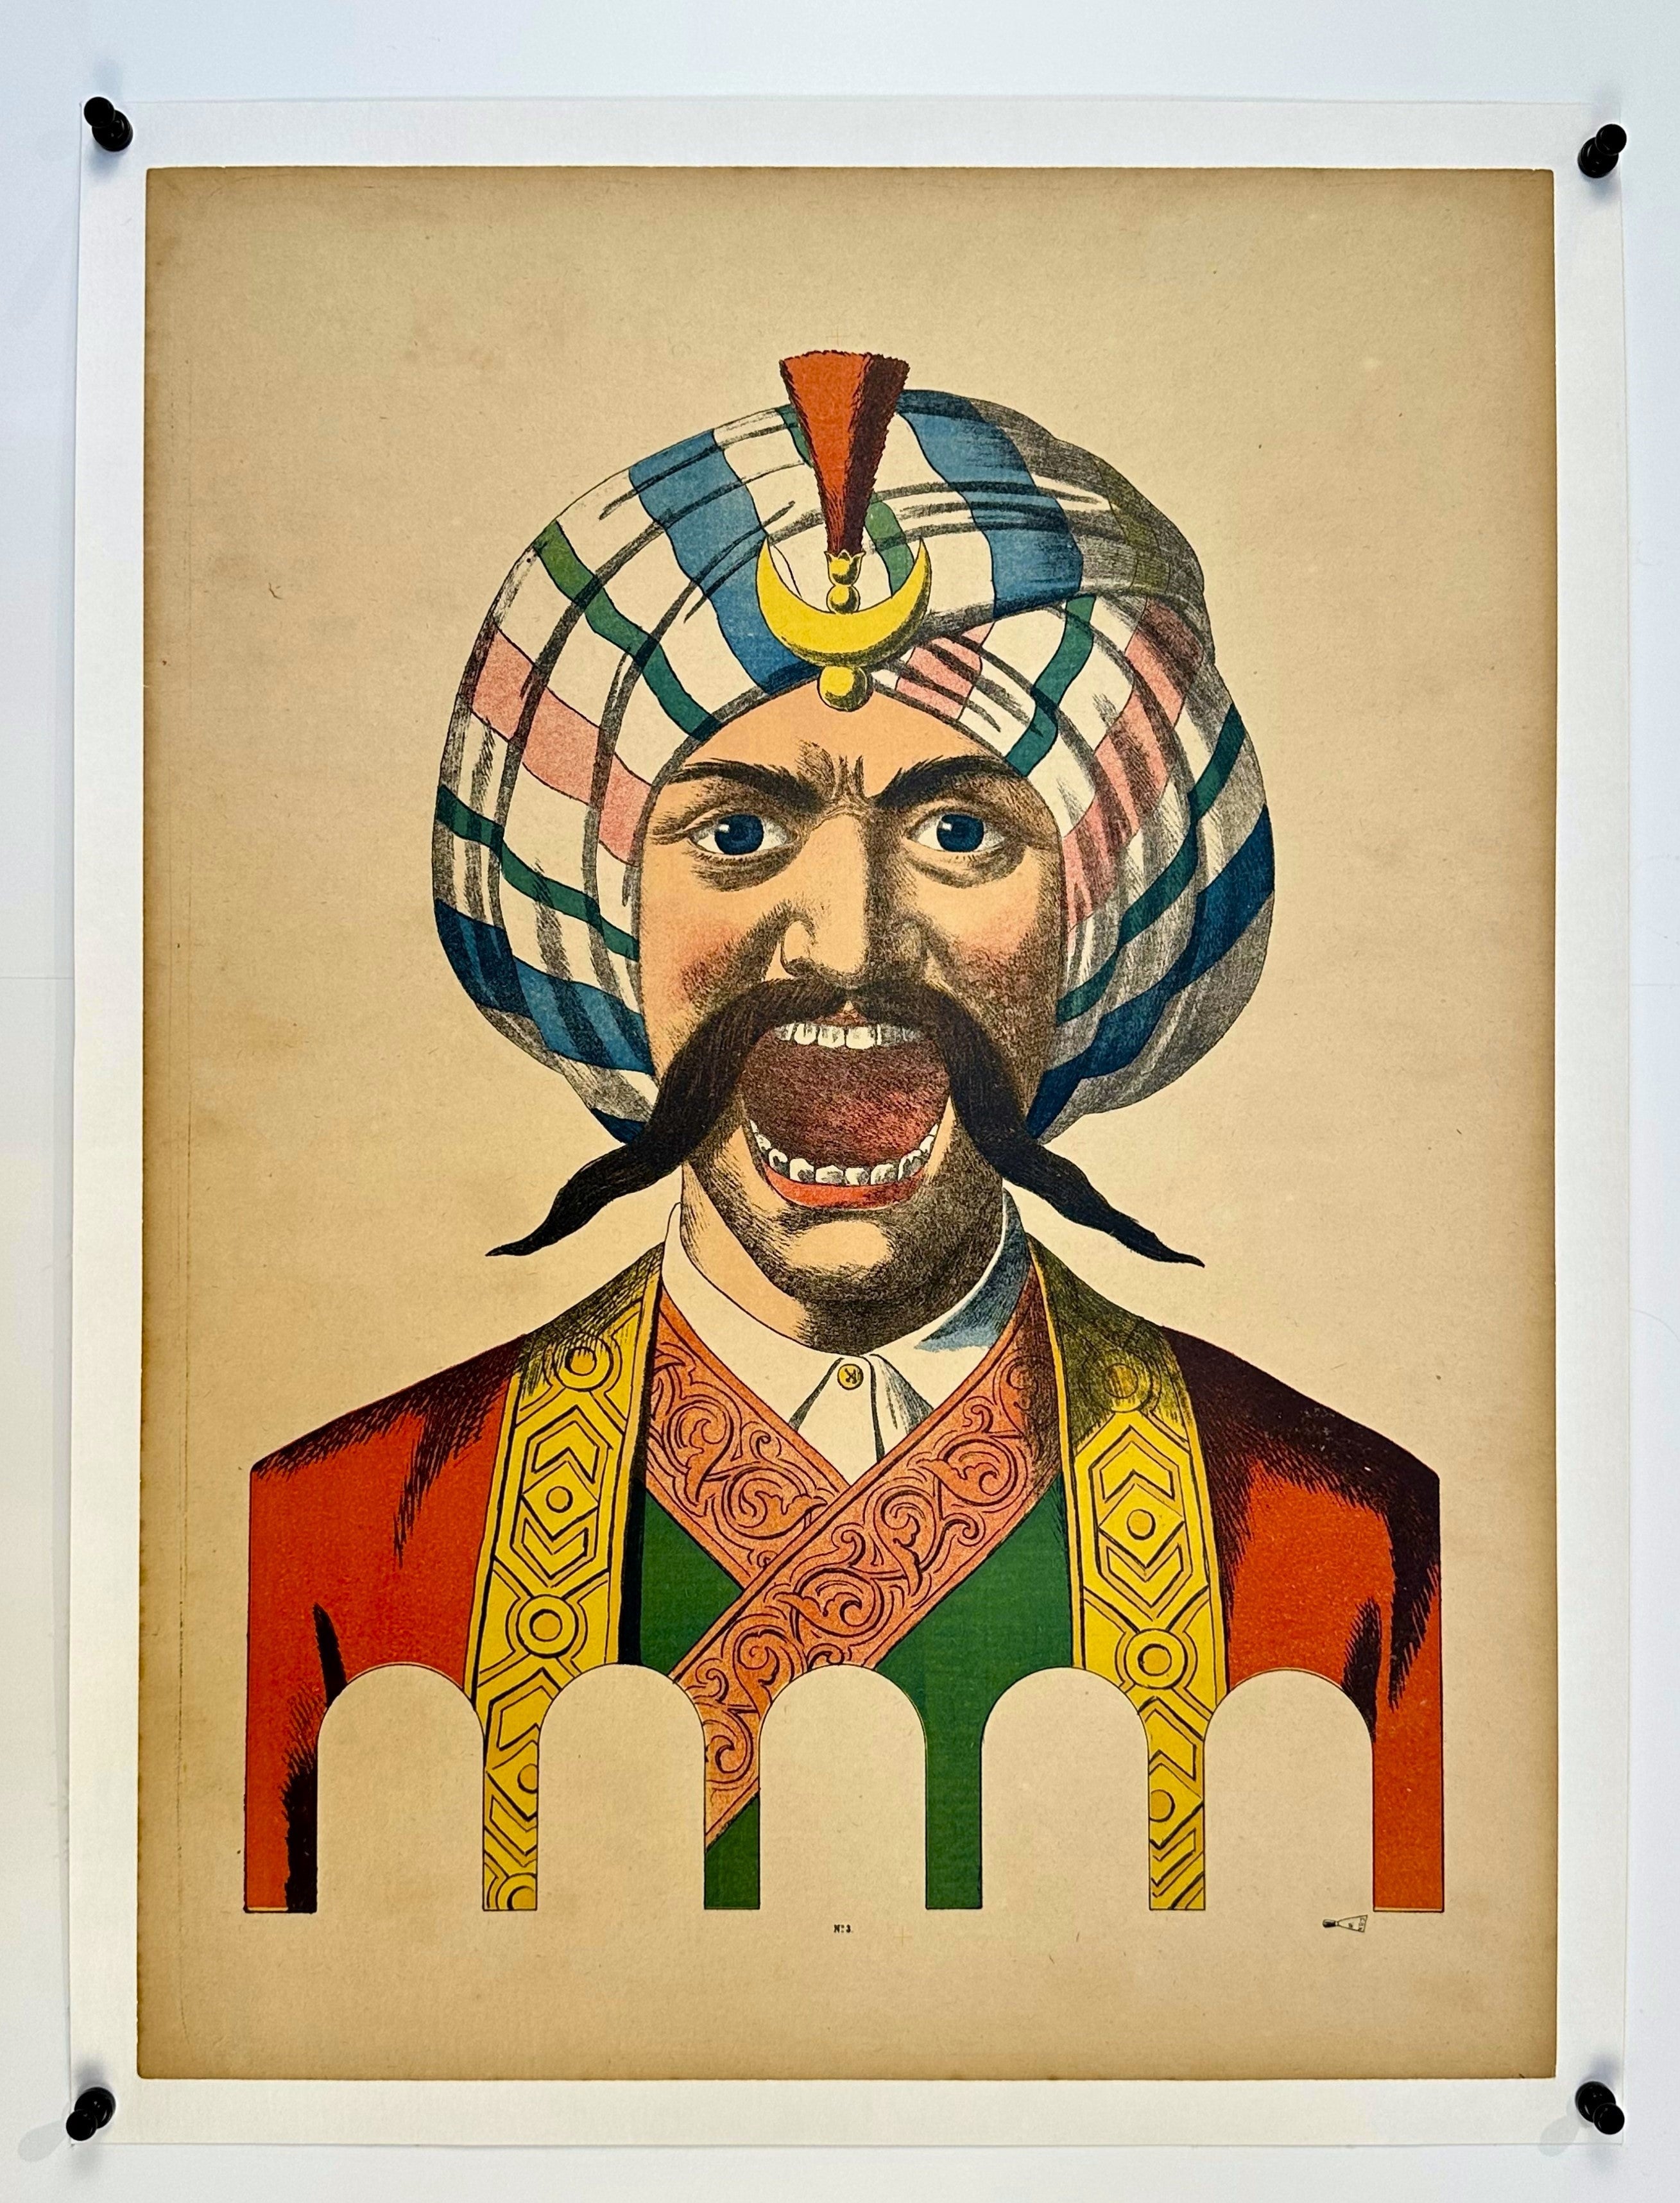 Authentic Vintage Poster | Turban N°3 au Homme Wissembourg